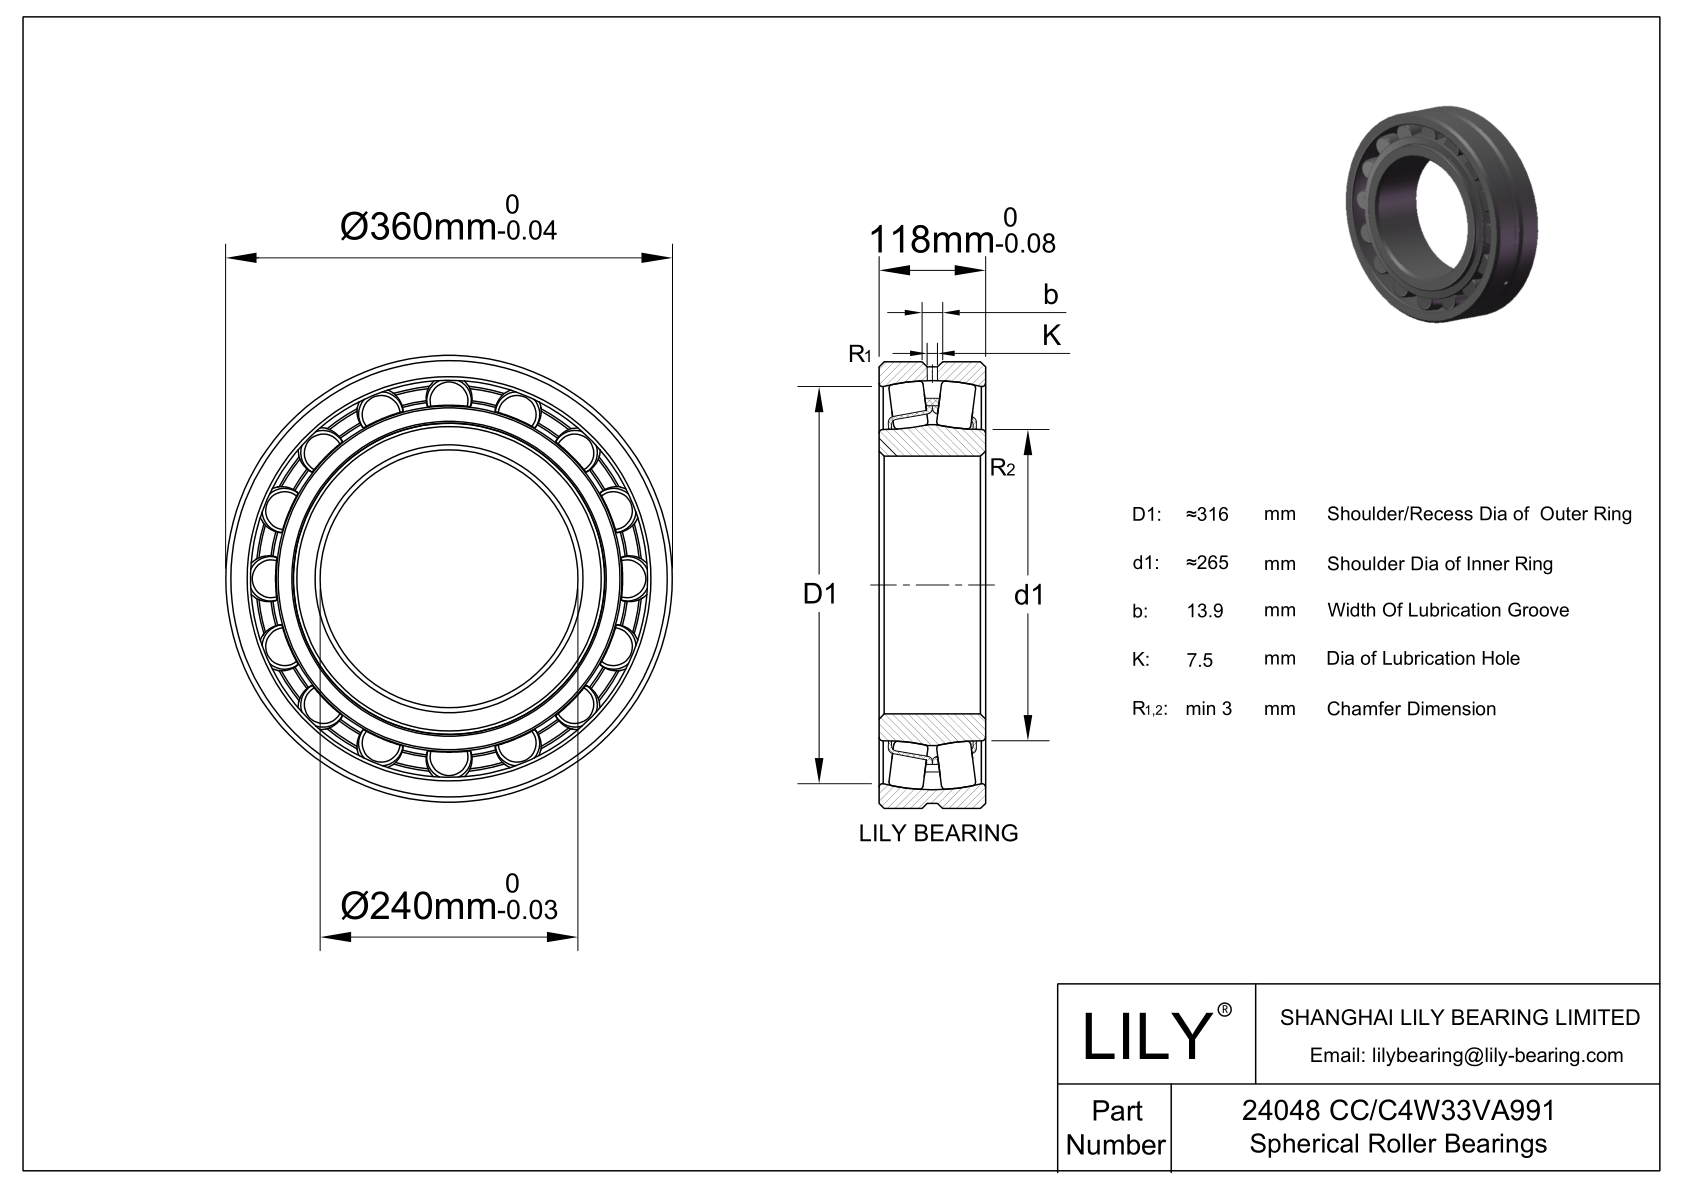 24048 CC/C4W33VA991 Double Row Spherical Roller Bearing cad drawing